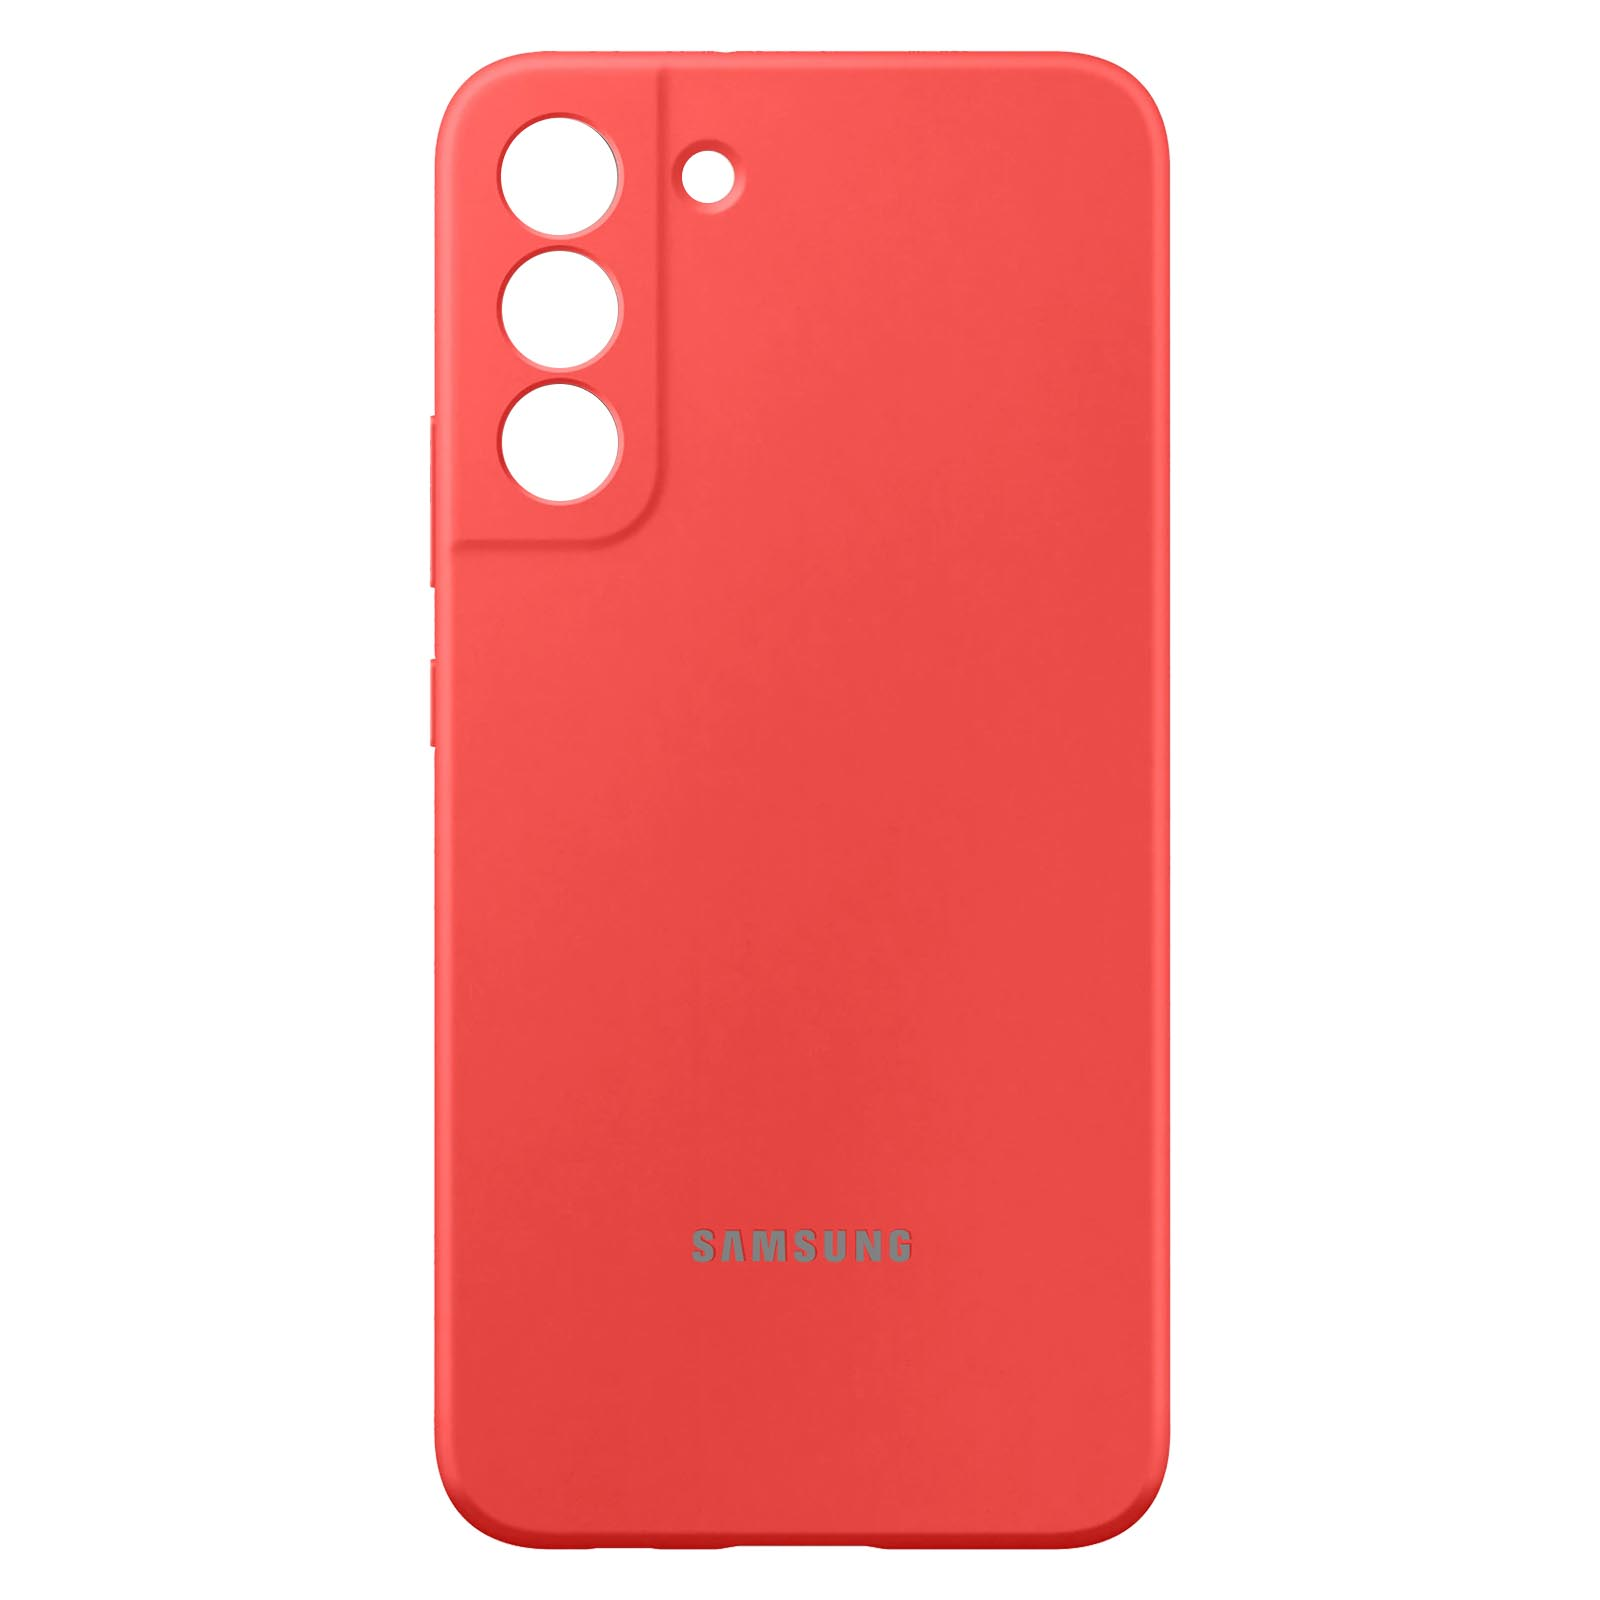 S22 Galaxy Plus, Series, Cover Korallenrot Silicone SAMSUNG Backcover, Samsung,